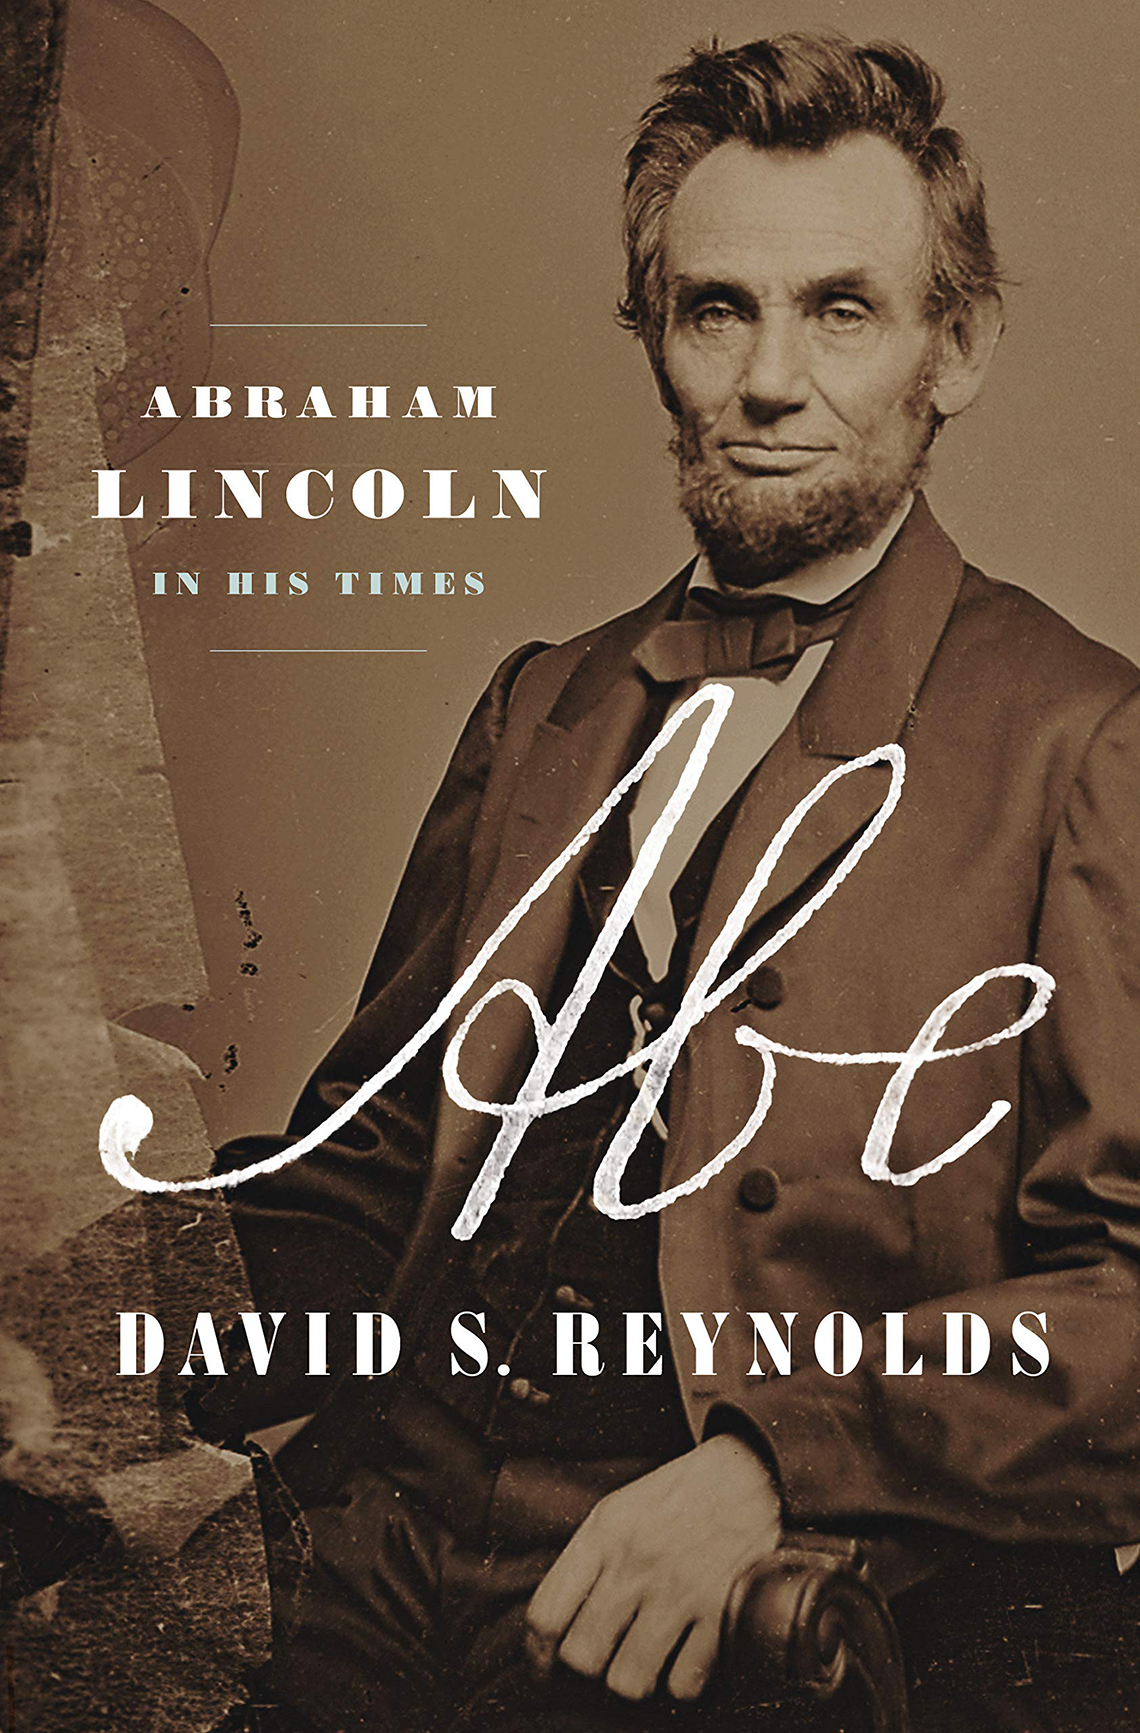 Abe: Abraham Lincoln in His Times, por David S. Reynolds.